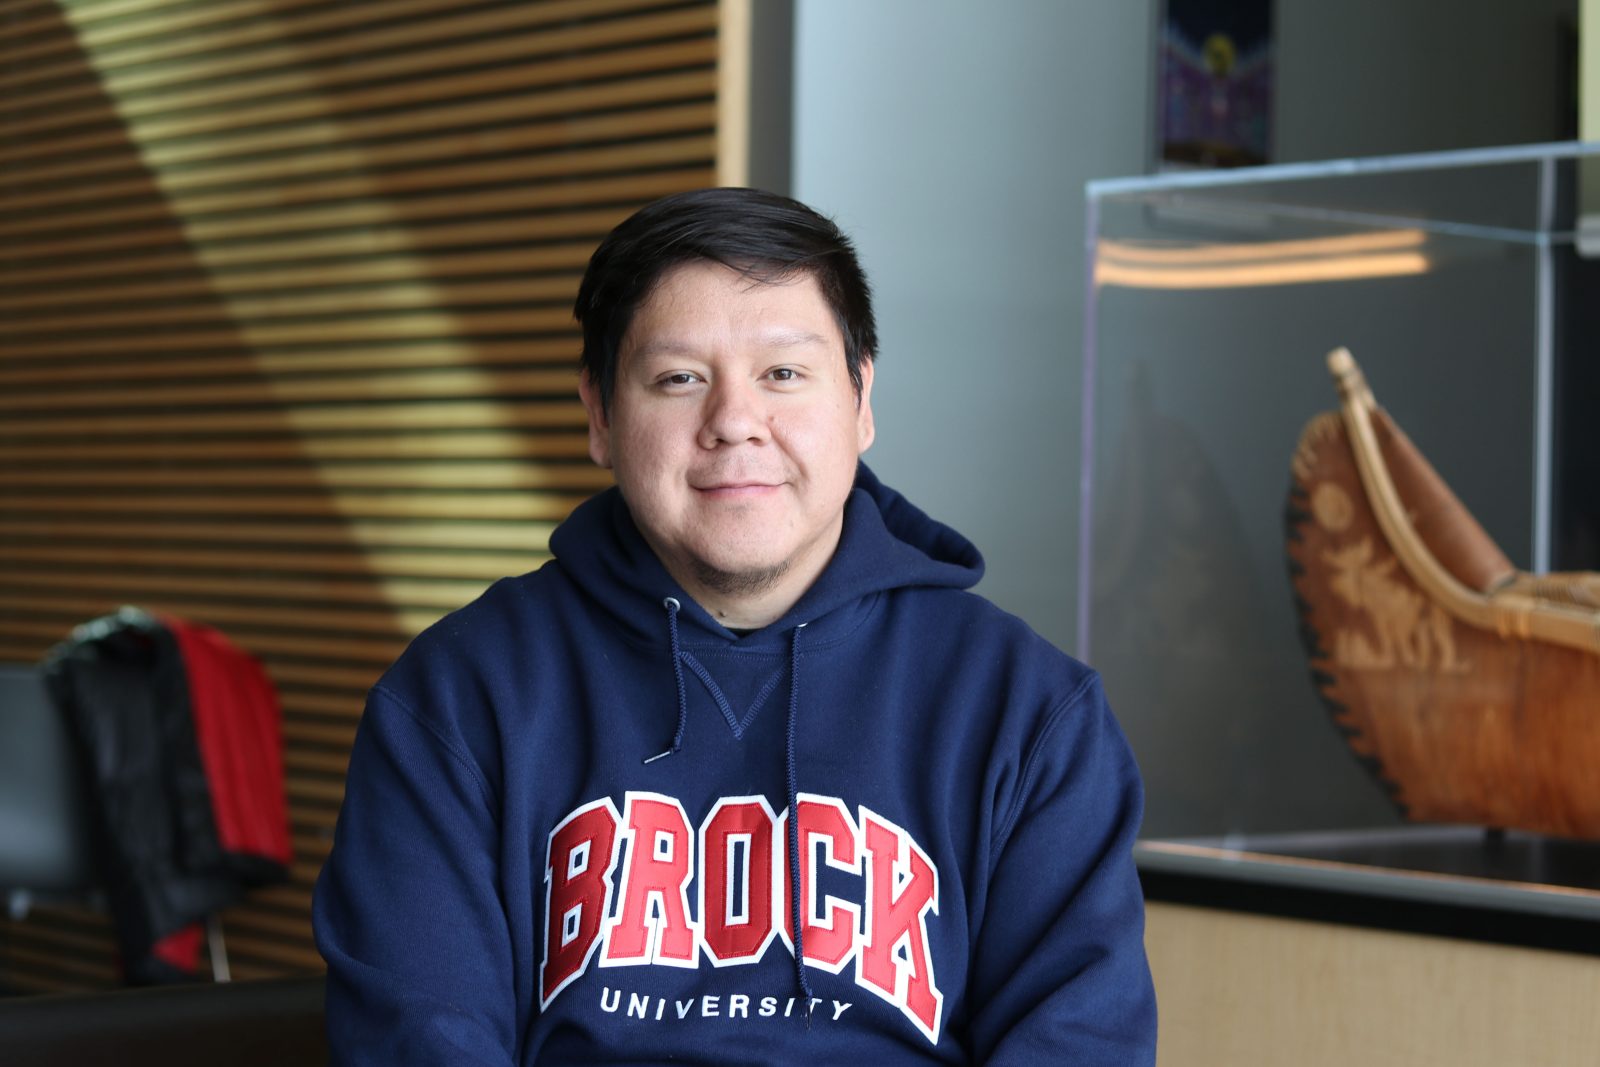 A man in a Brock University shirts sits in an indoor atrium.